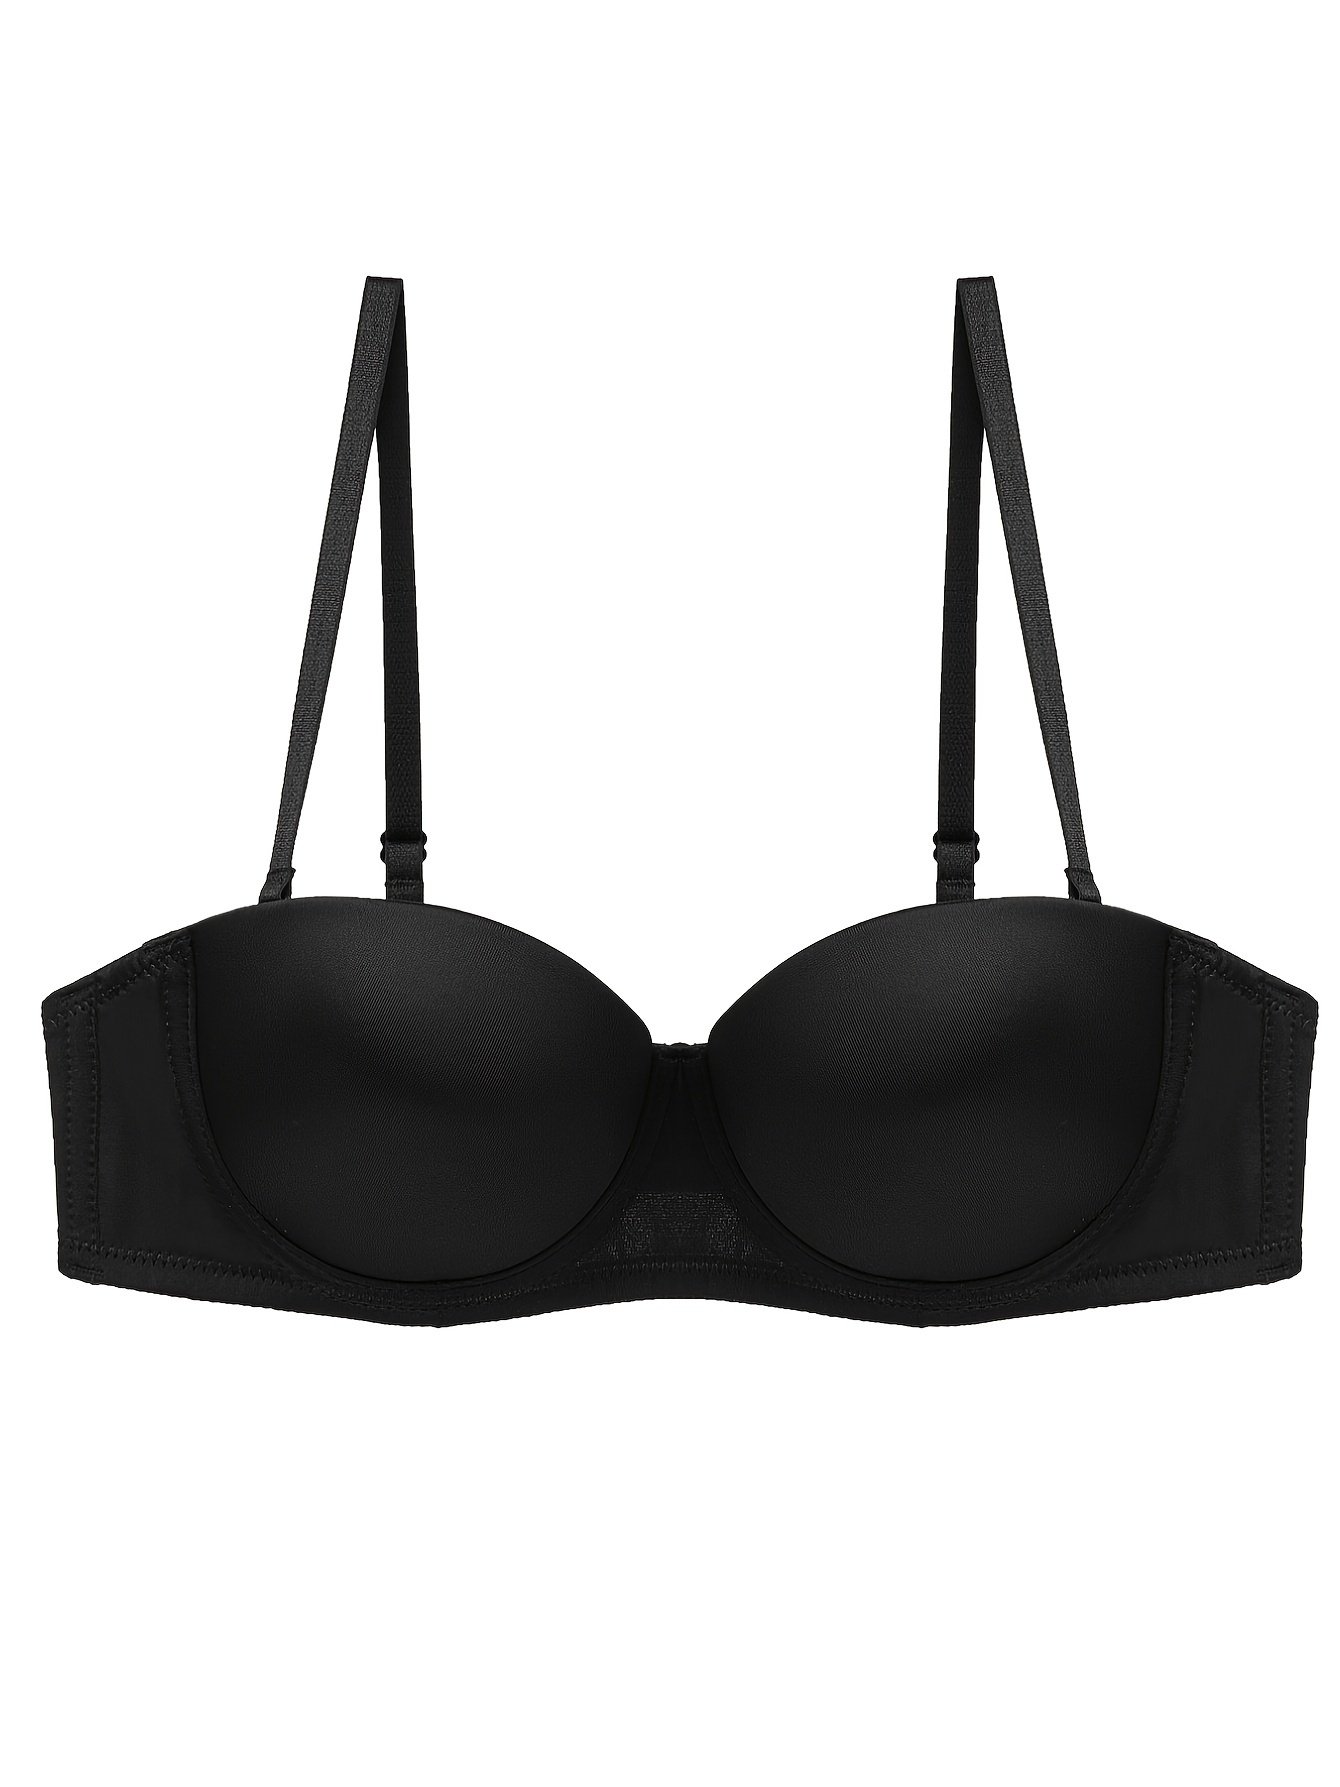 Strapless Bras for Big Busted Women Pushup Invisible Seamless Bra Wireless  Convertible Bandeau Bralette Lingerie Tops (Color : Black, Size 